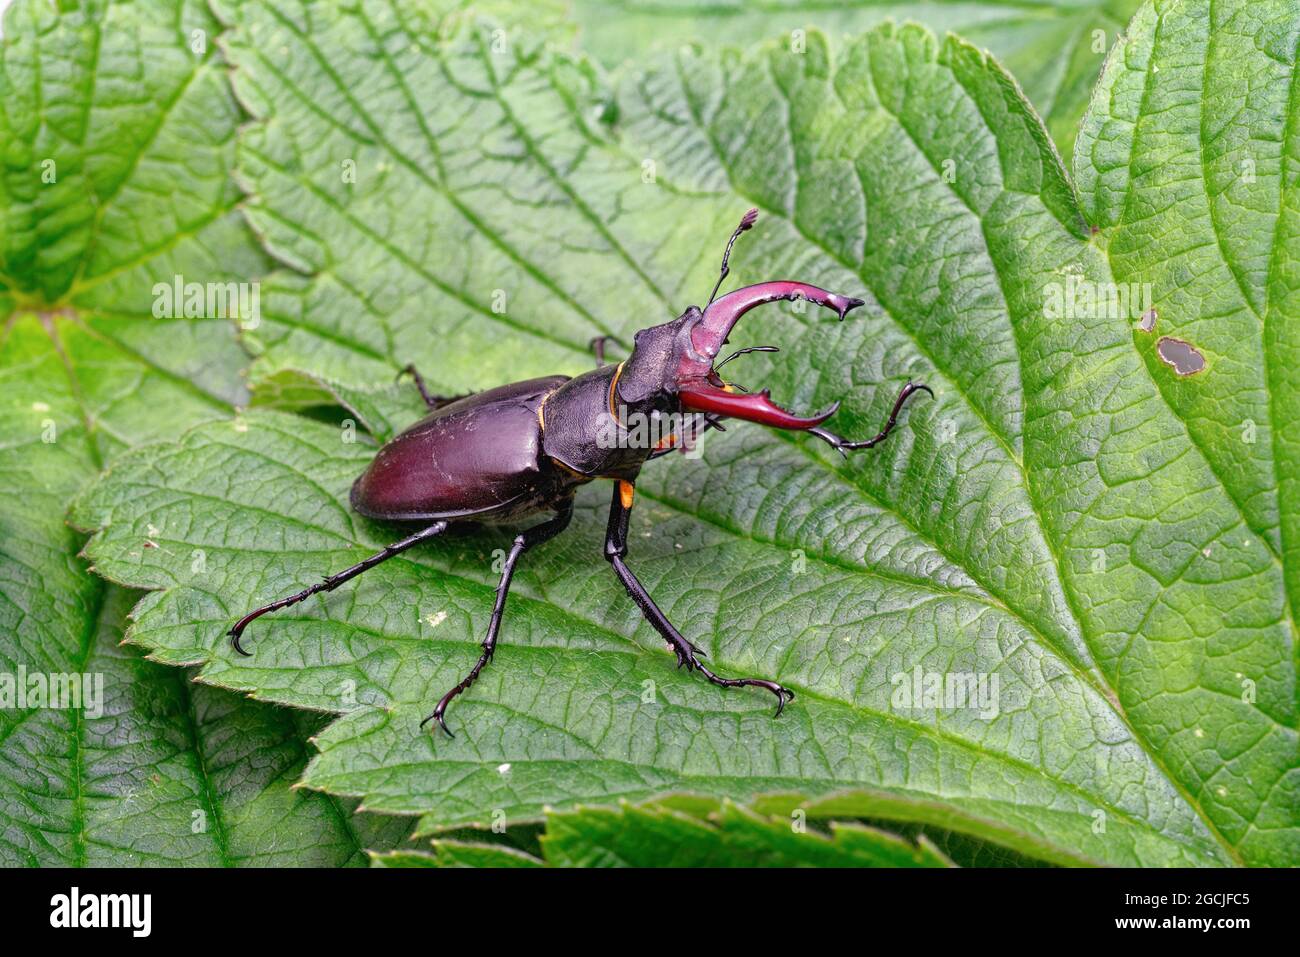 Close up of a Stag beetle Lucanus cervus, on a green leaf Stock Photo